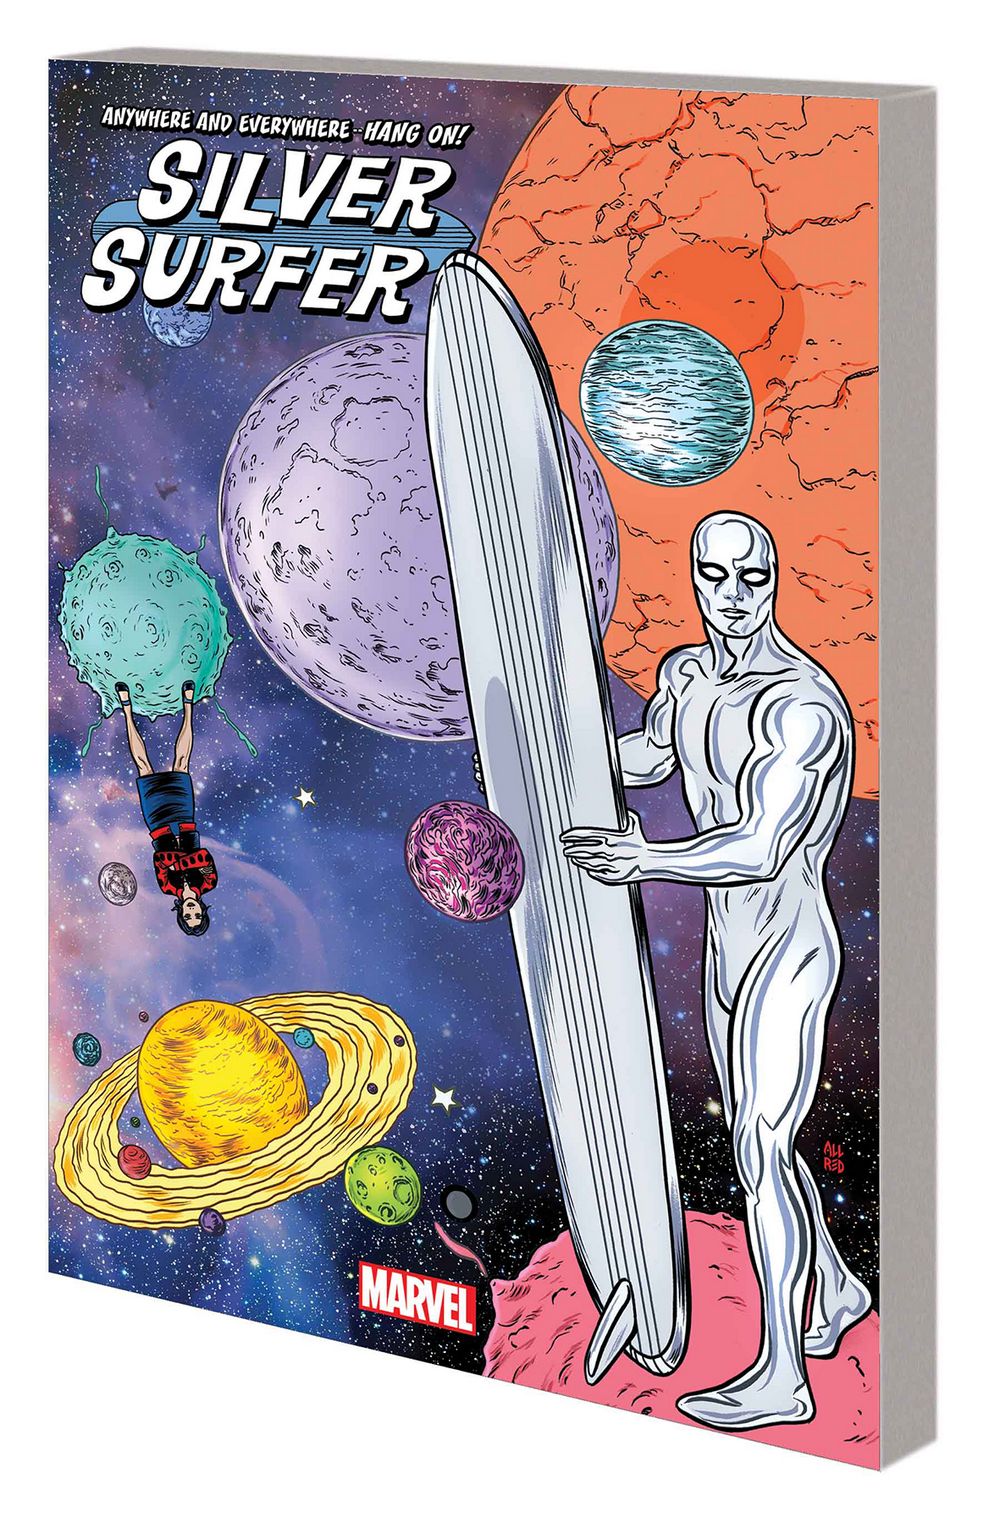 Silver Surfer TP VOL 05 Man Who Lived Twice